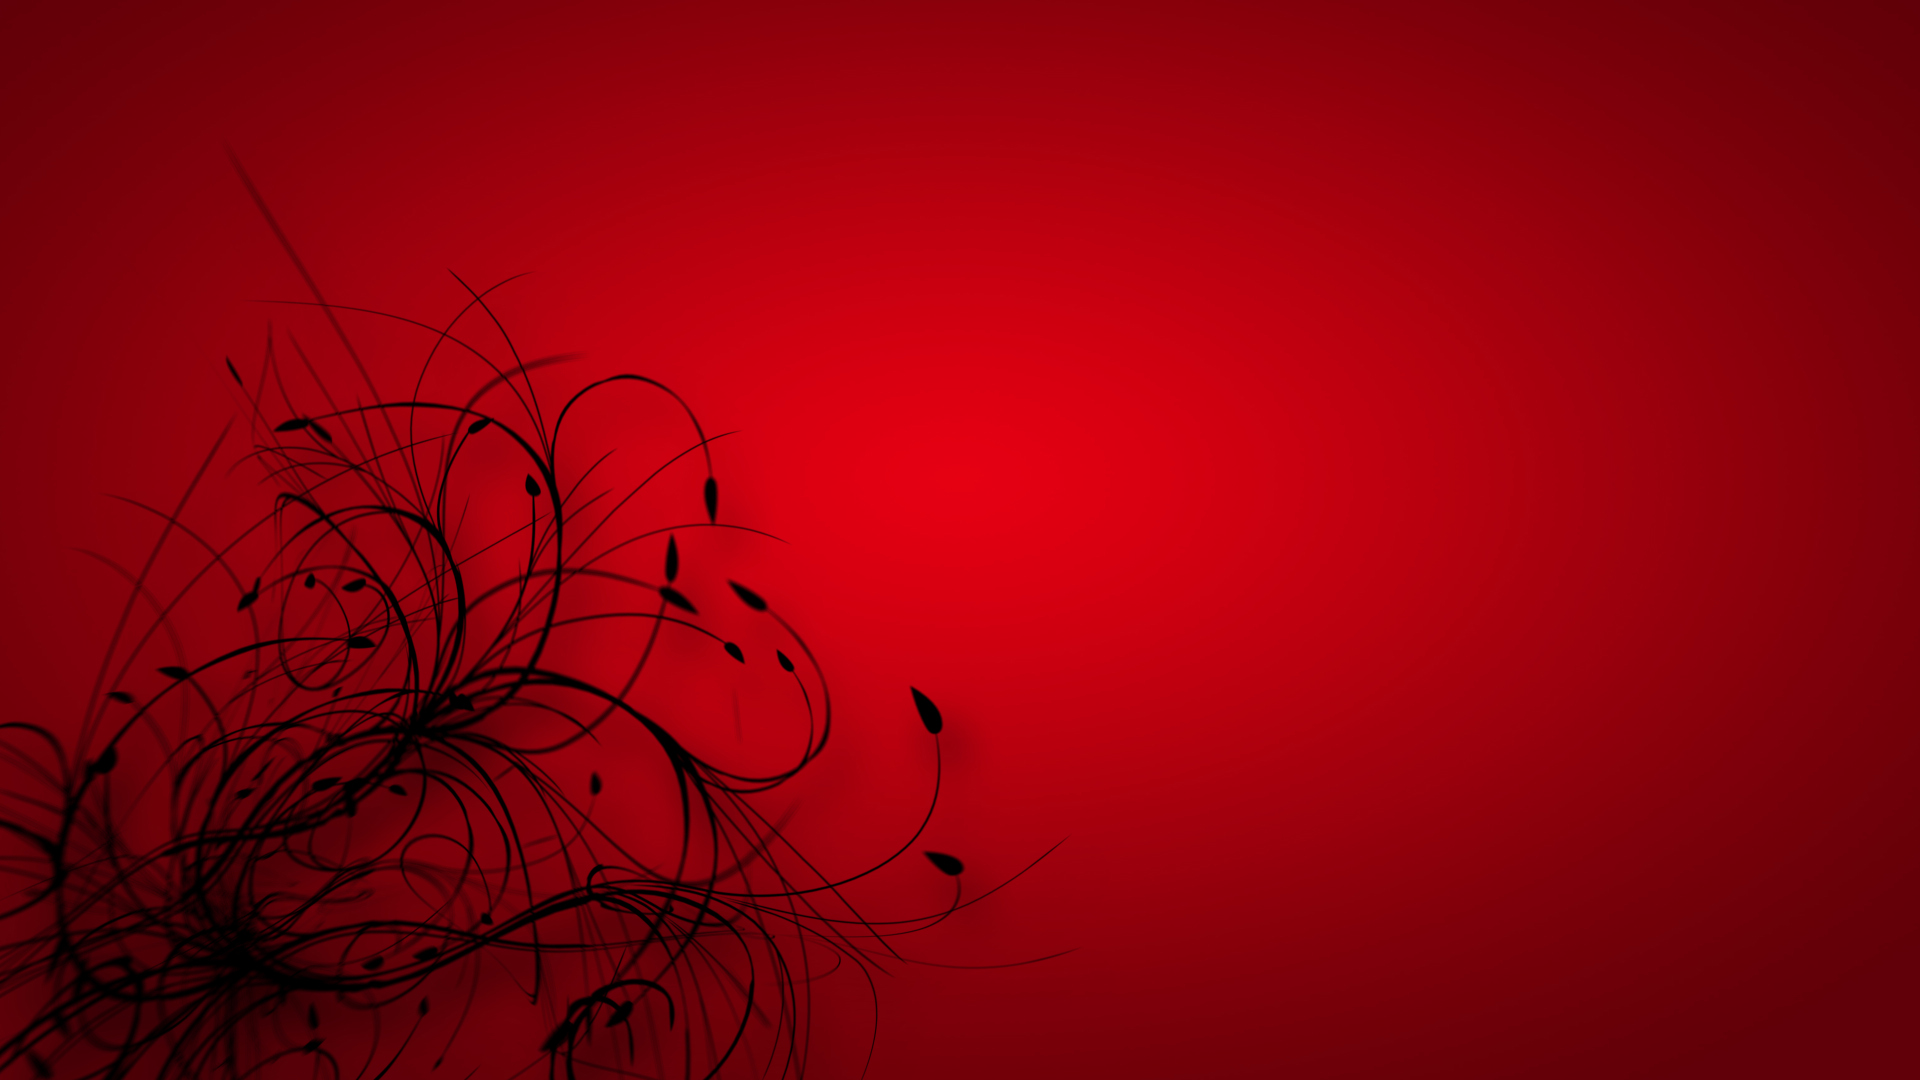 Download HD Red Wallpaper For Desktop And Mobile 1920x1080